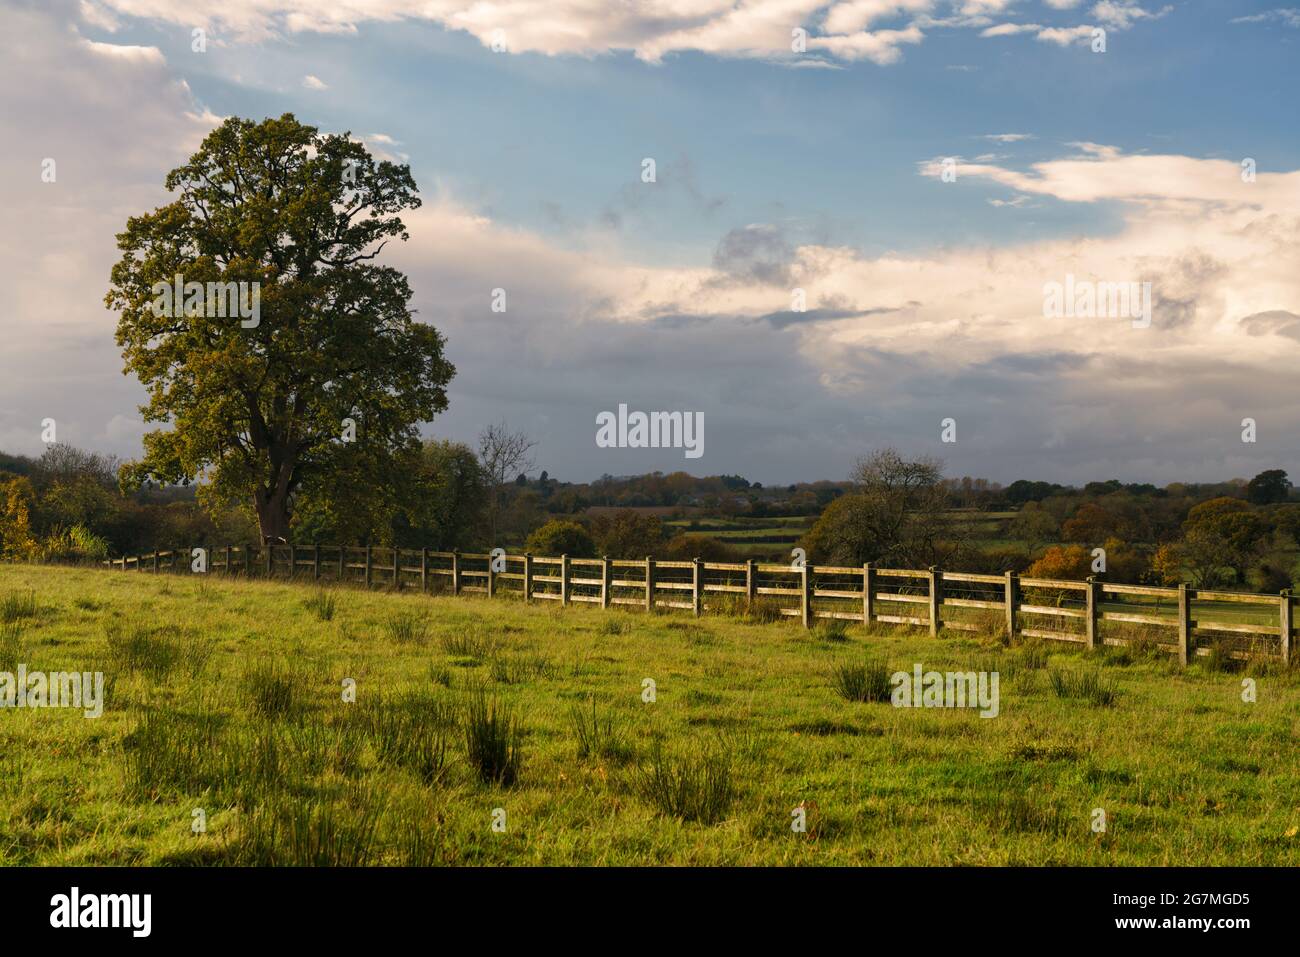 View of a fenced paddock in evening sunlight. Stock Photo